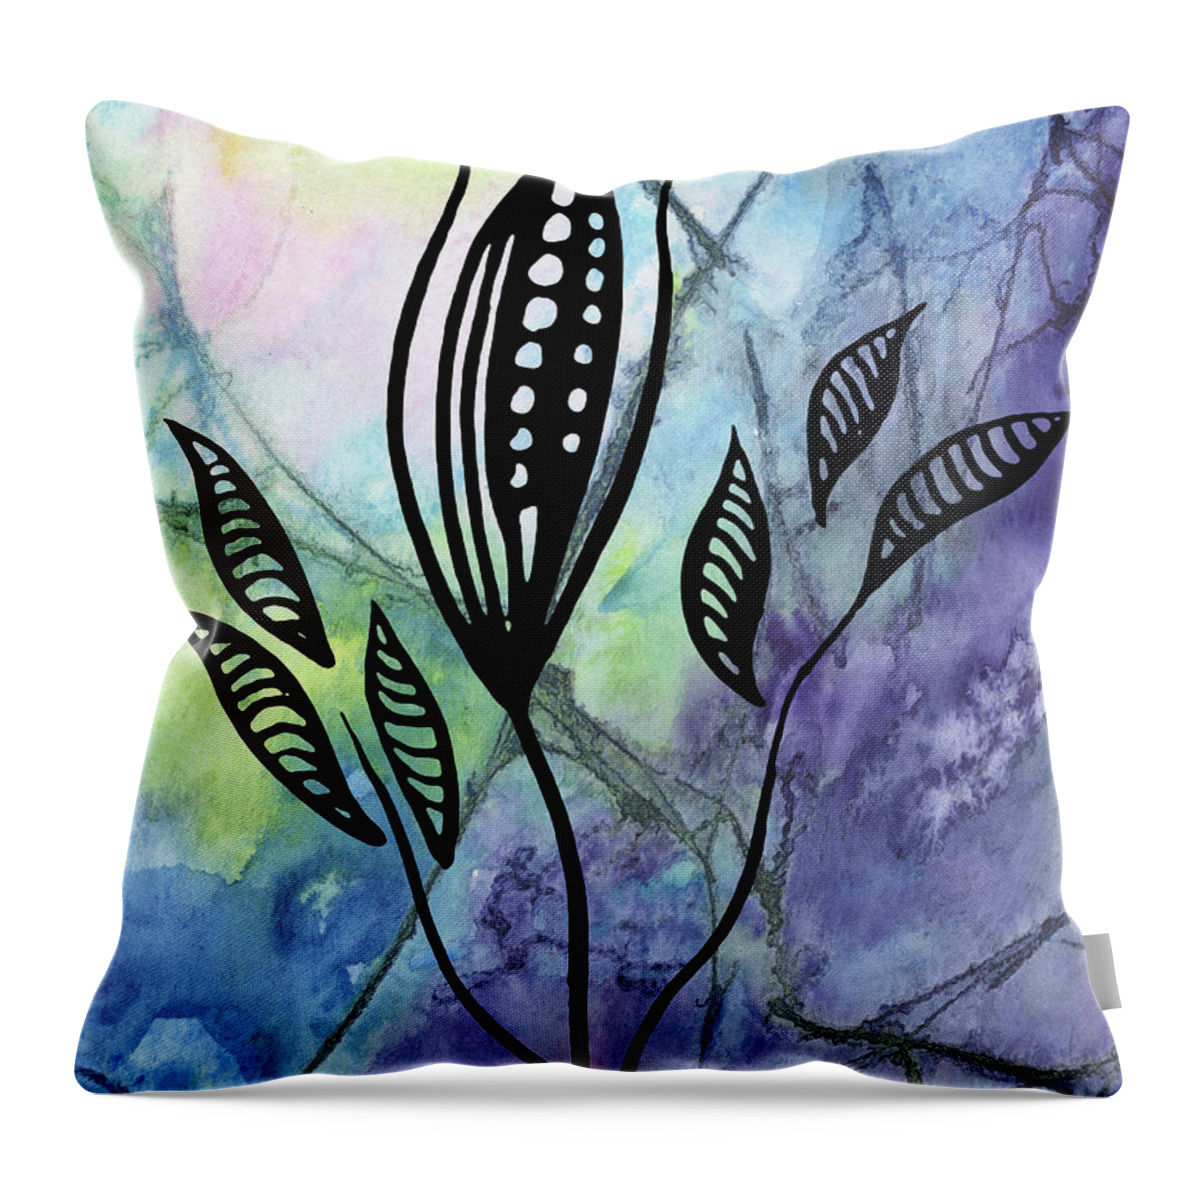 Floral Pattern Throw Pillow featuring the painting Elegant Pattern With Leaves In Blue And Purple Watercolor I by Irina Sztukowski